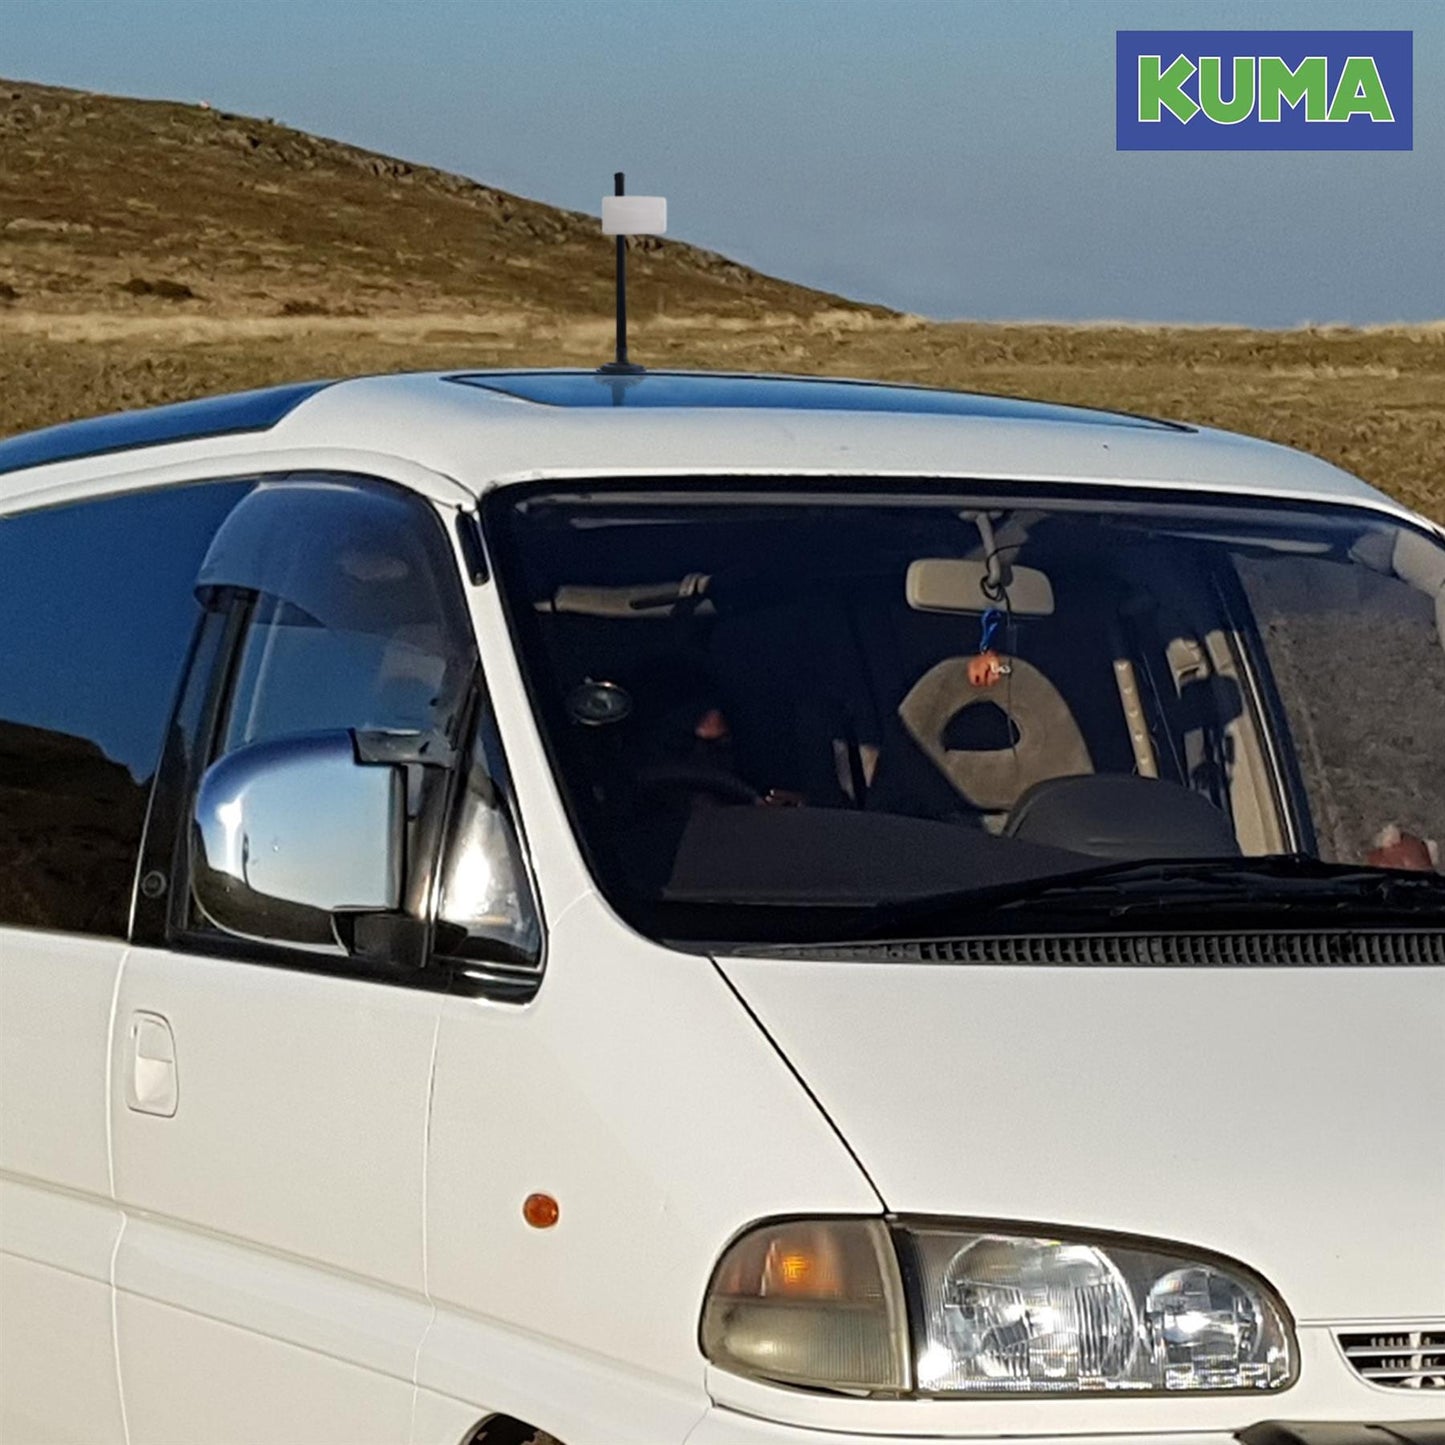 KUMA Magnetic Pole Mount for TV Aerial Antenna - 300mm Magnet Mounting Loft Mast use in Caravan Motorhome Truck Boat - Also be use as Flag Display Sign Poster Paper Stand - Indoor or Outdoor - Black